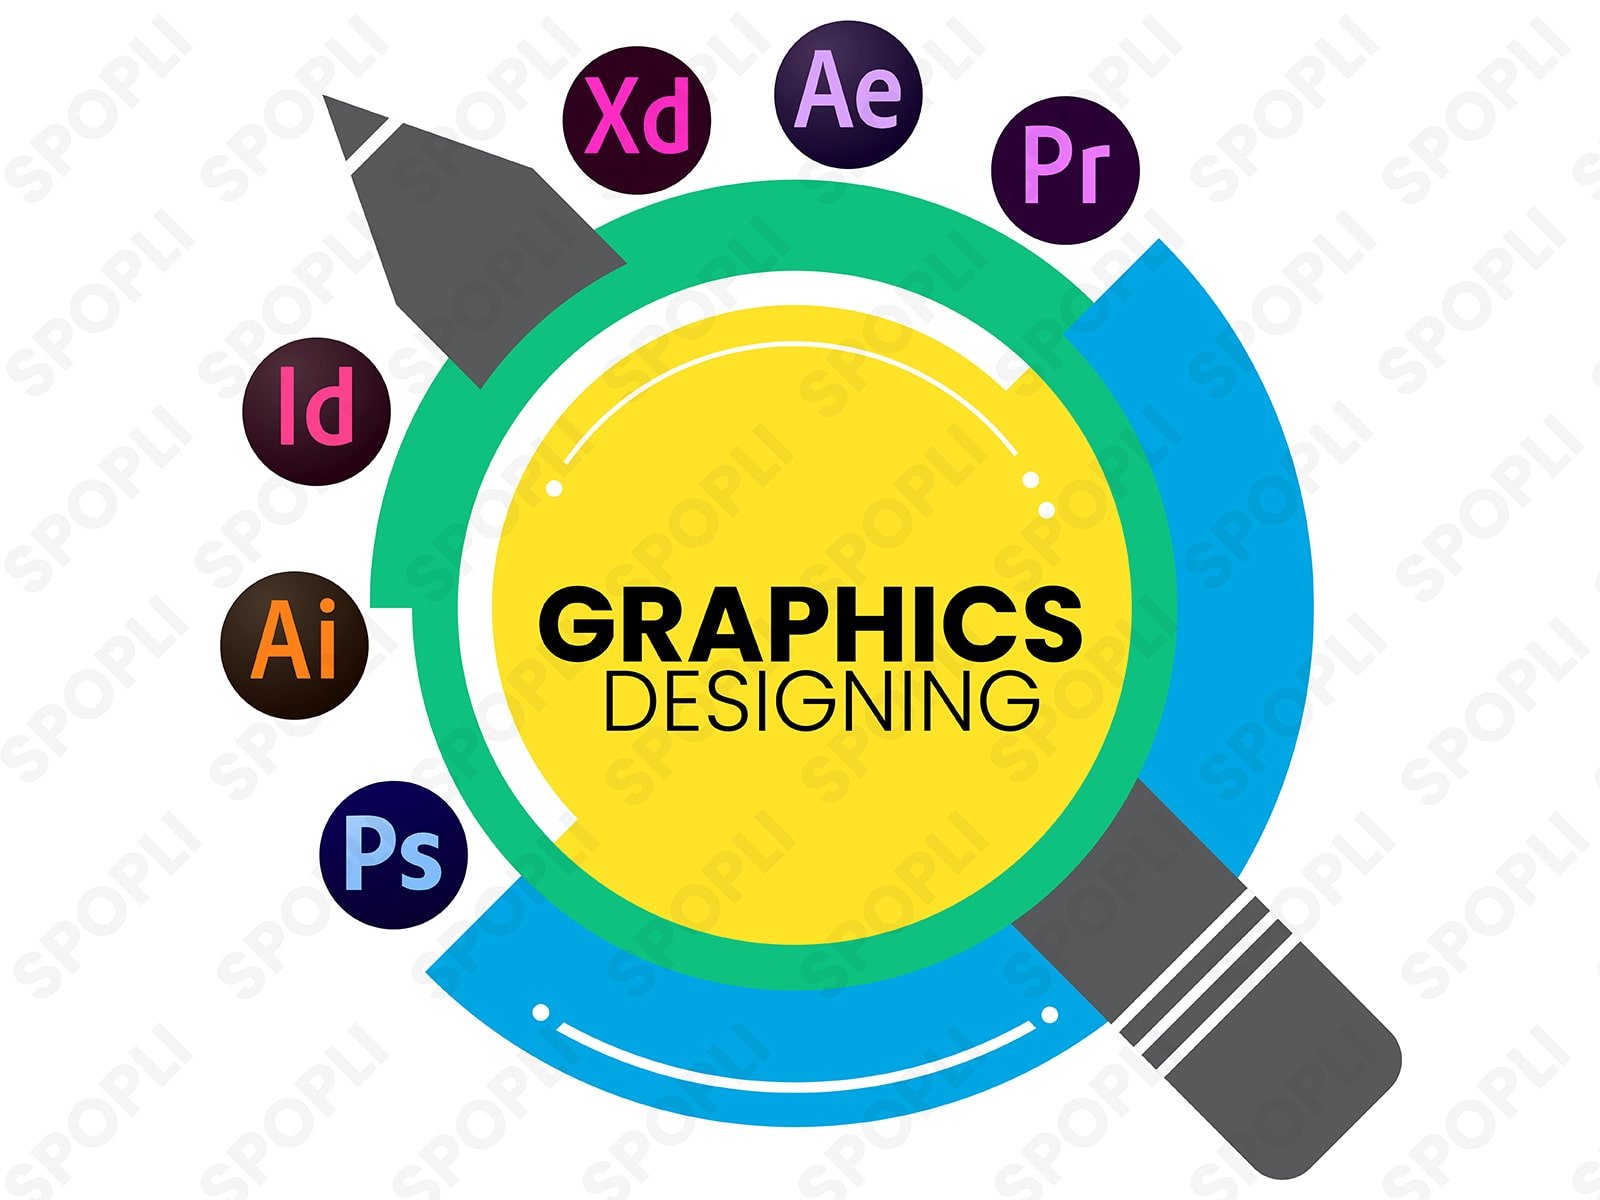 No need to complicate things towards graphics designing when you could have easy and free access to multiple templates